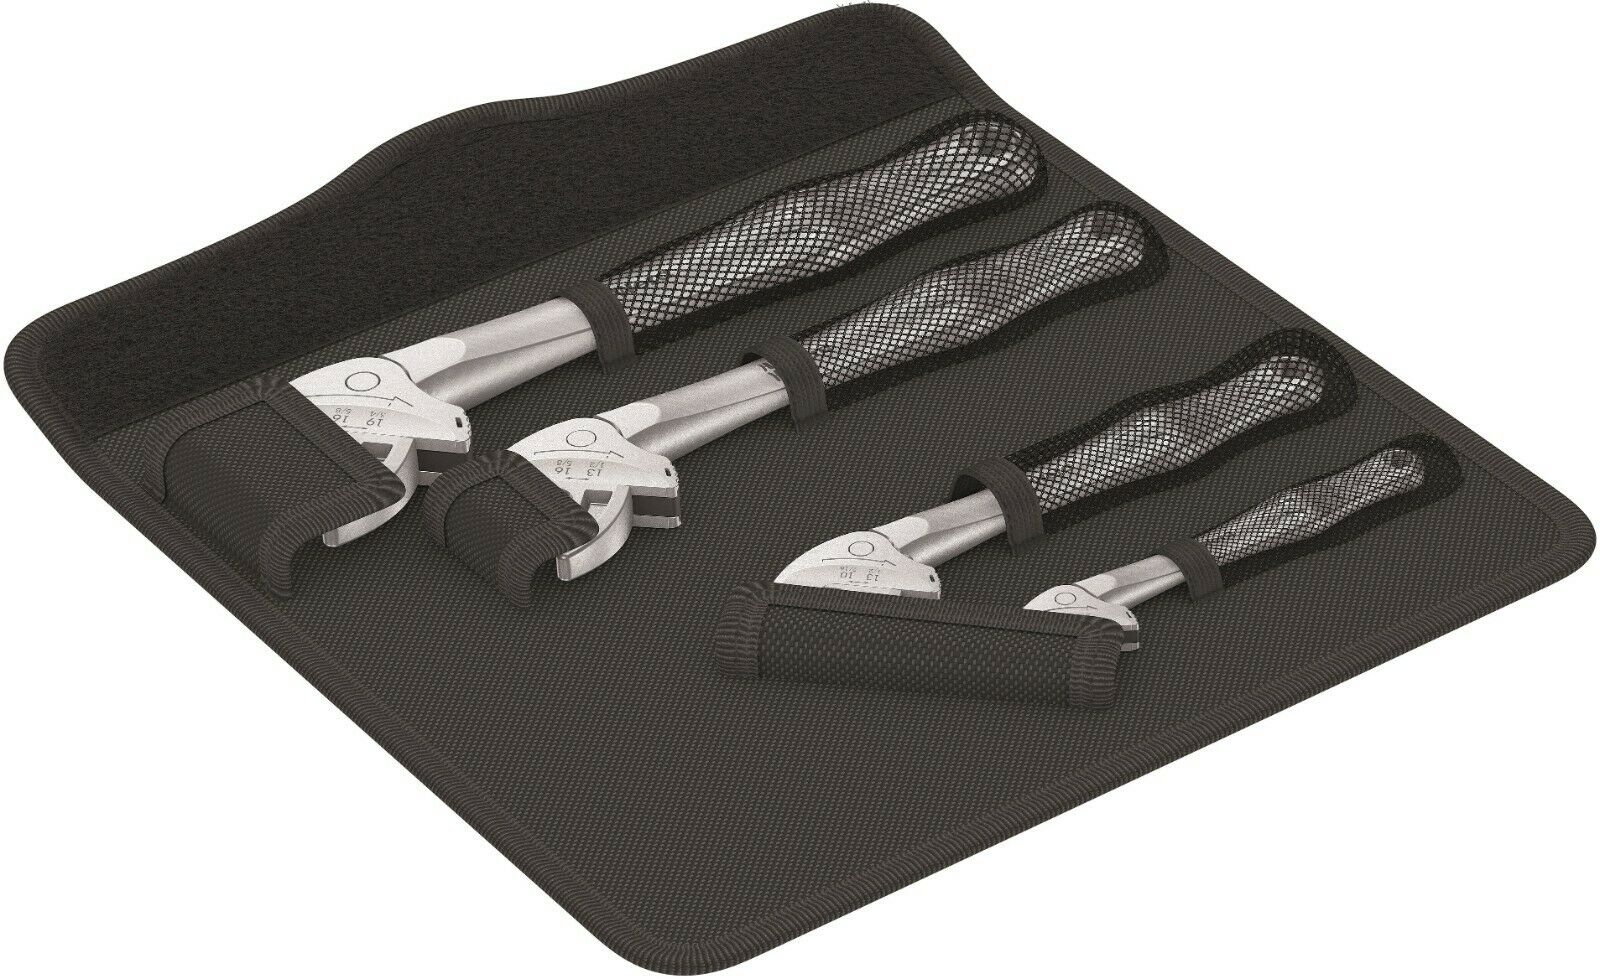 Wera 6004 Joker Self-Setting 4-Piece Wrench Set - Highly Versatile with  Metric & Imperial Capabilities – 05020110001